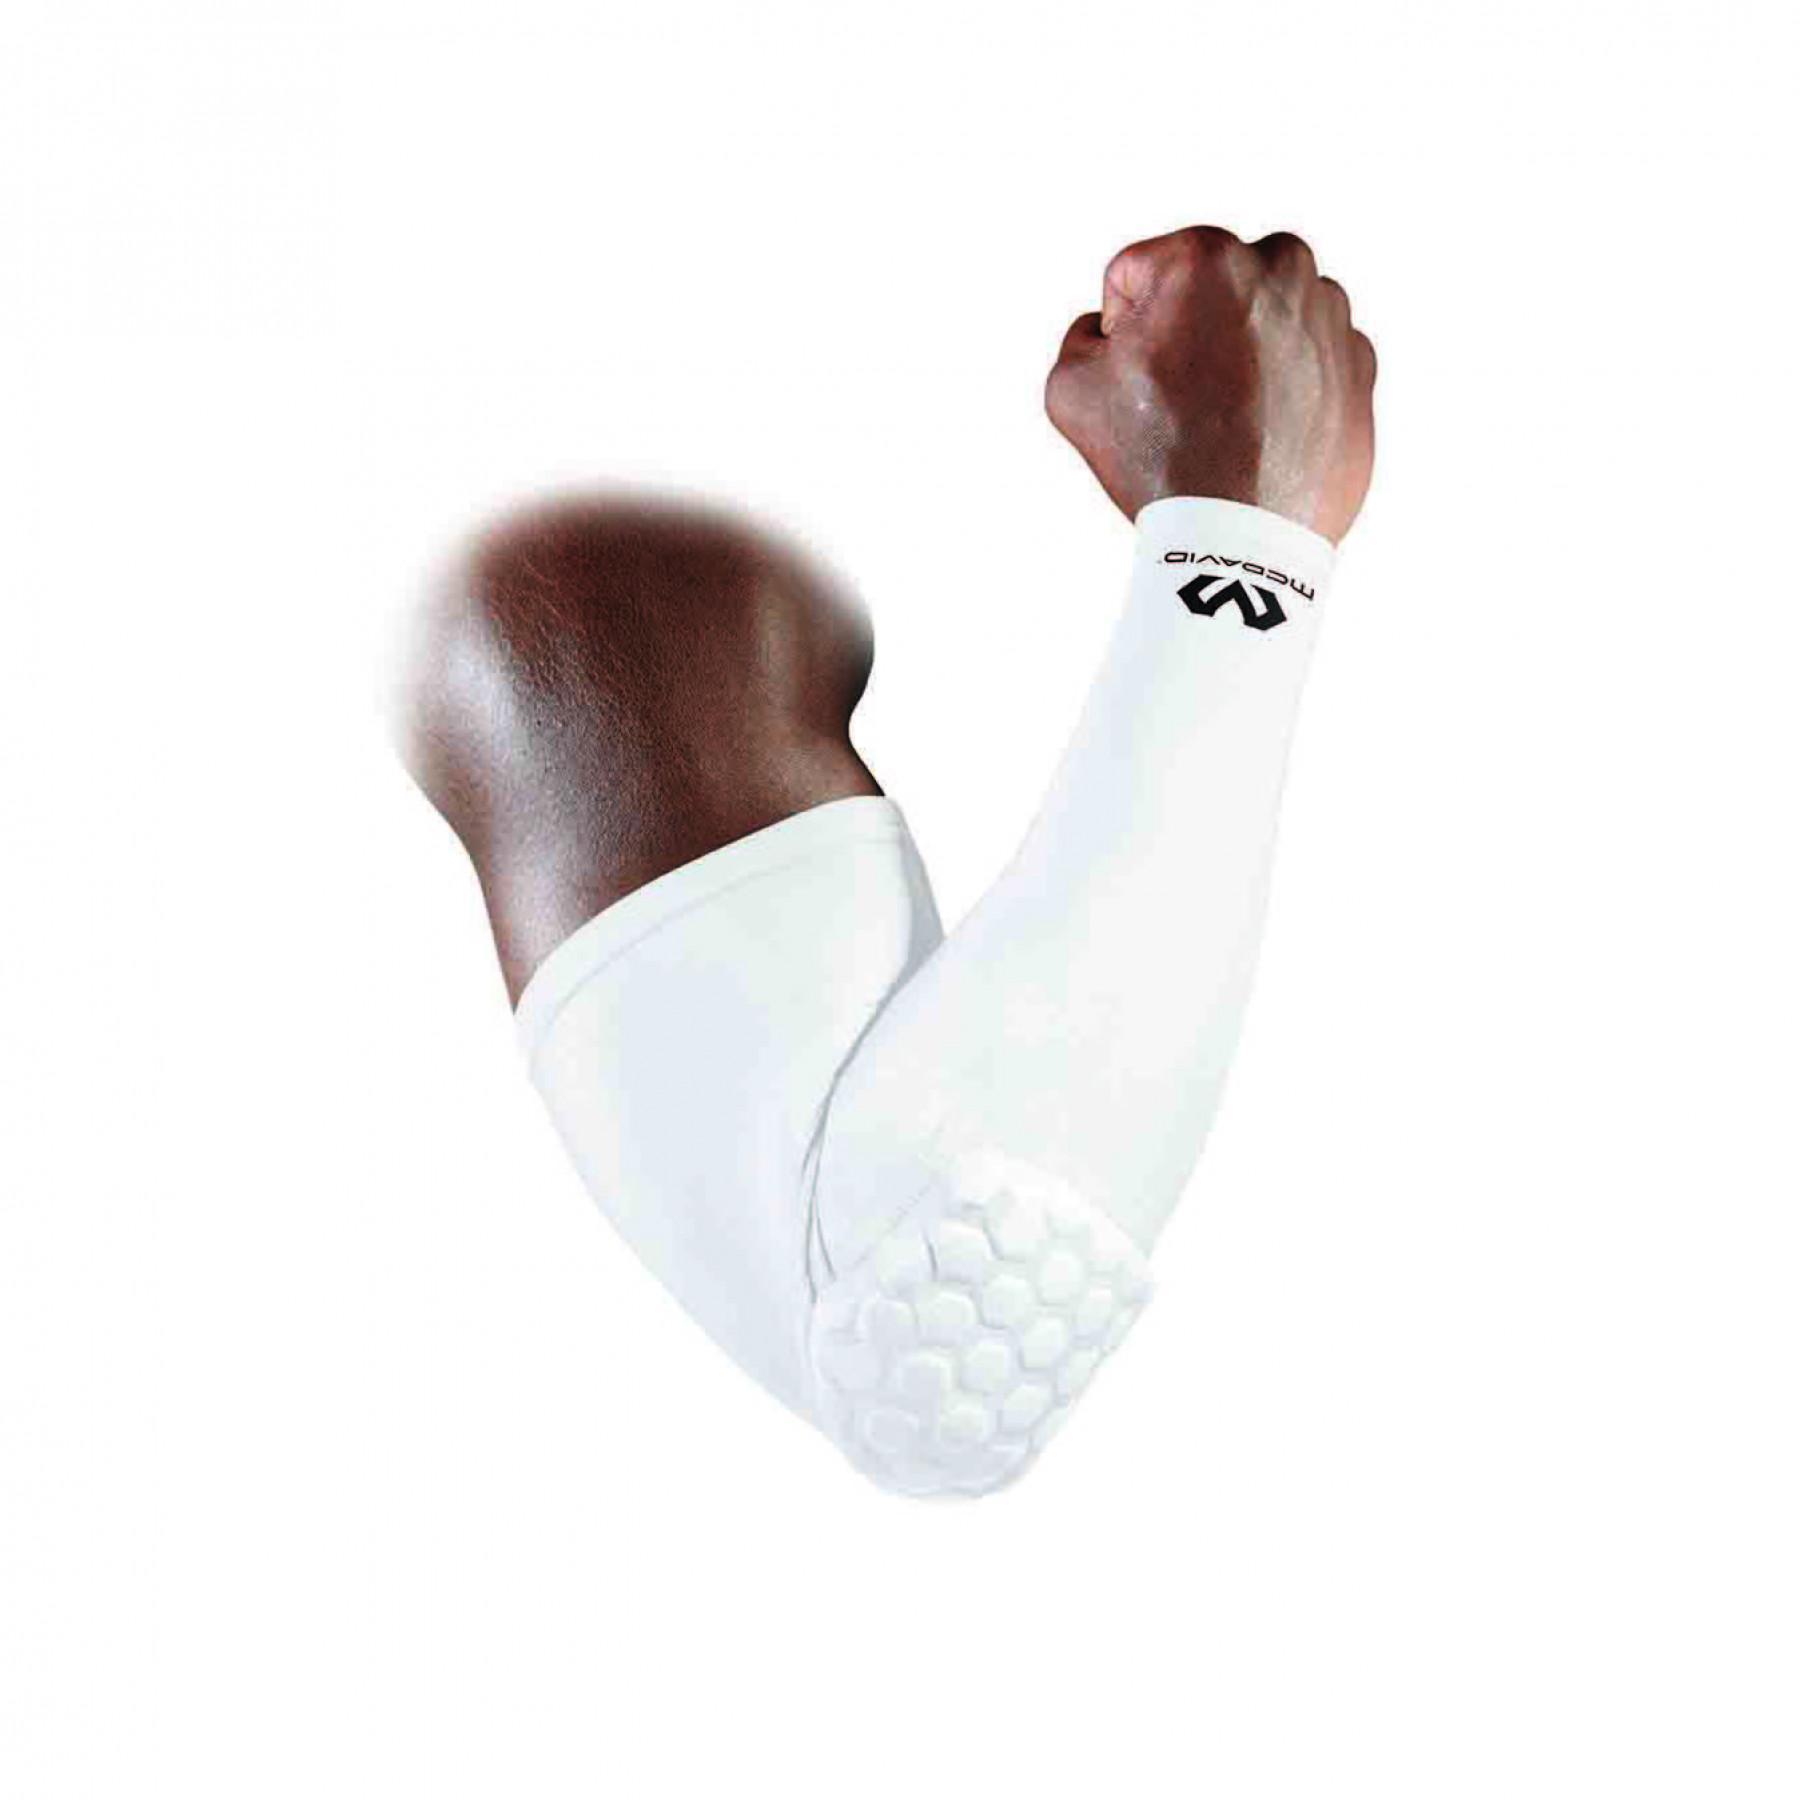 Compression armsleeve for sport  Under Control Armsleeves by Compressport